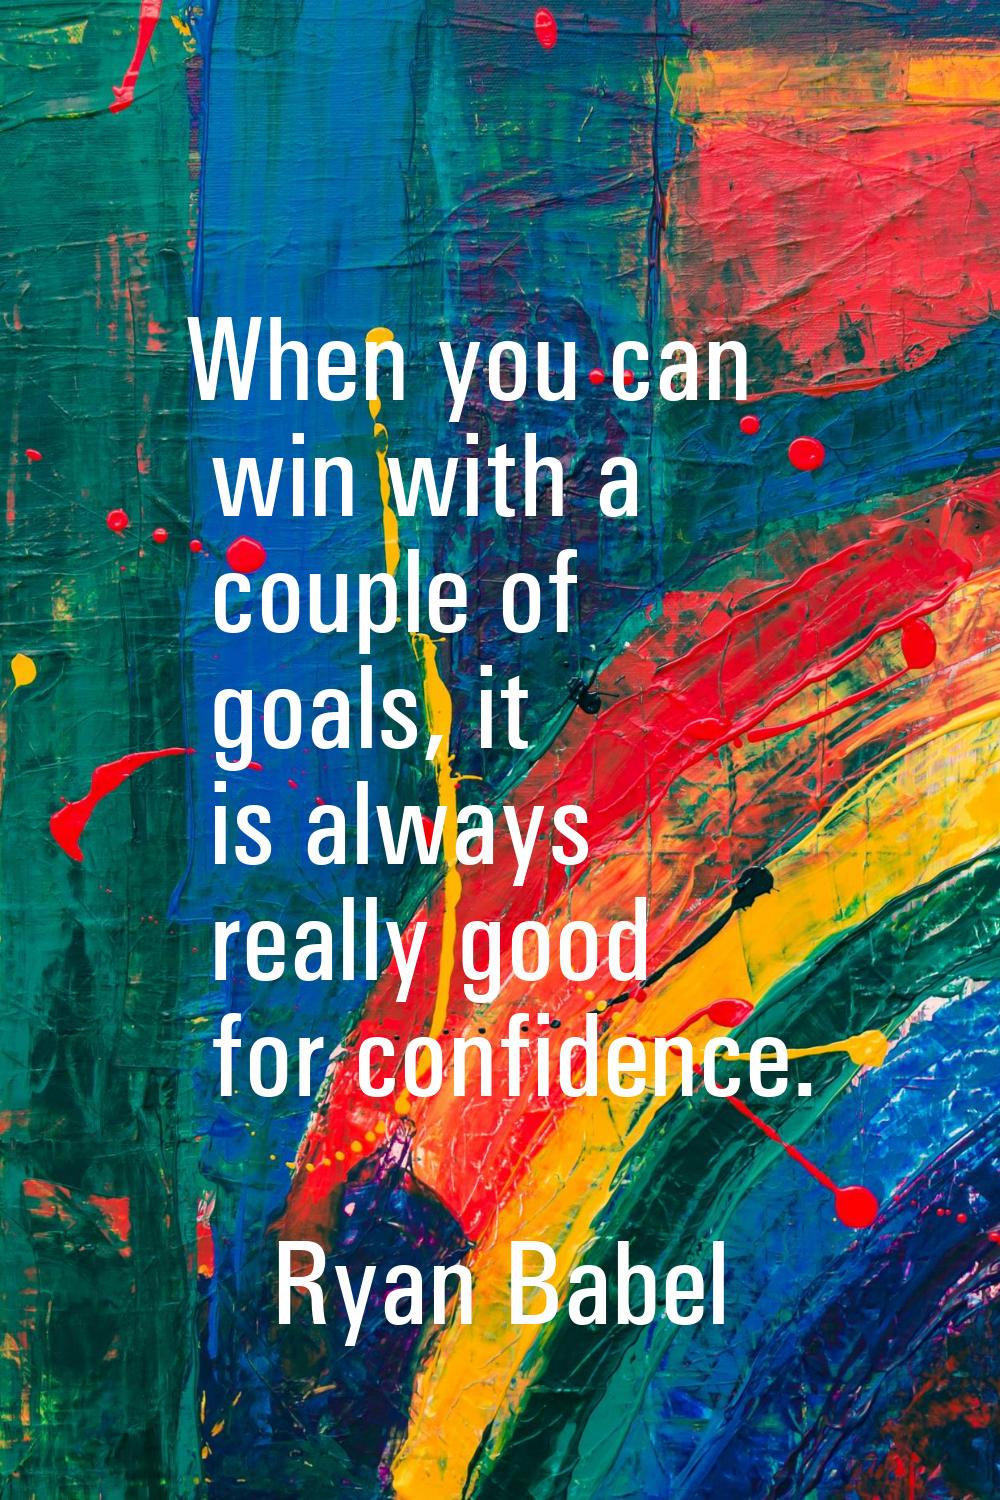 When you can win with a couple of goals, it is always really good for confidence.